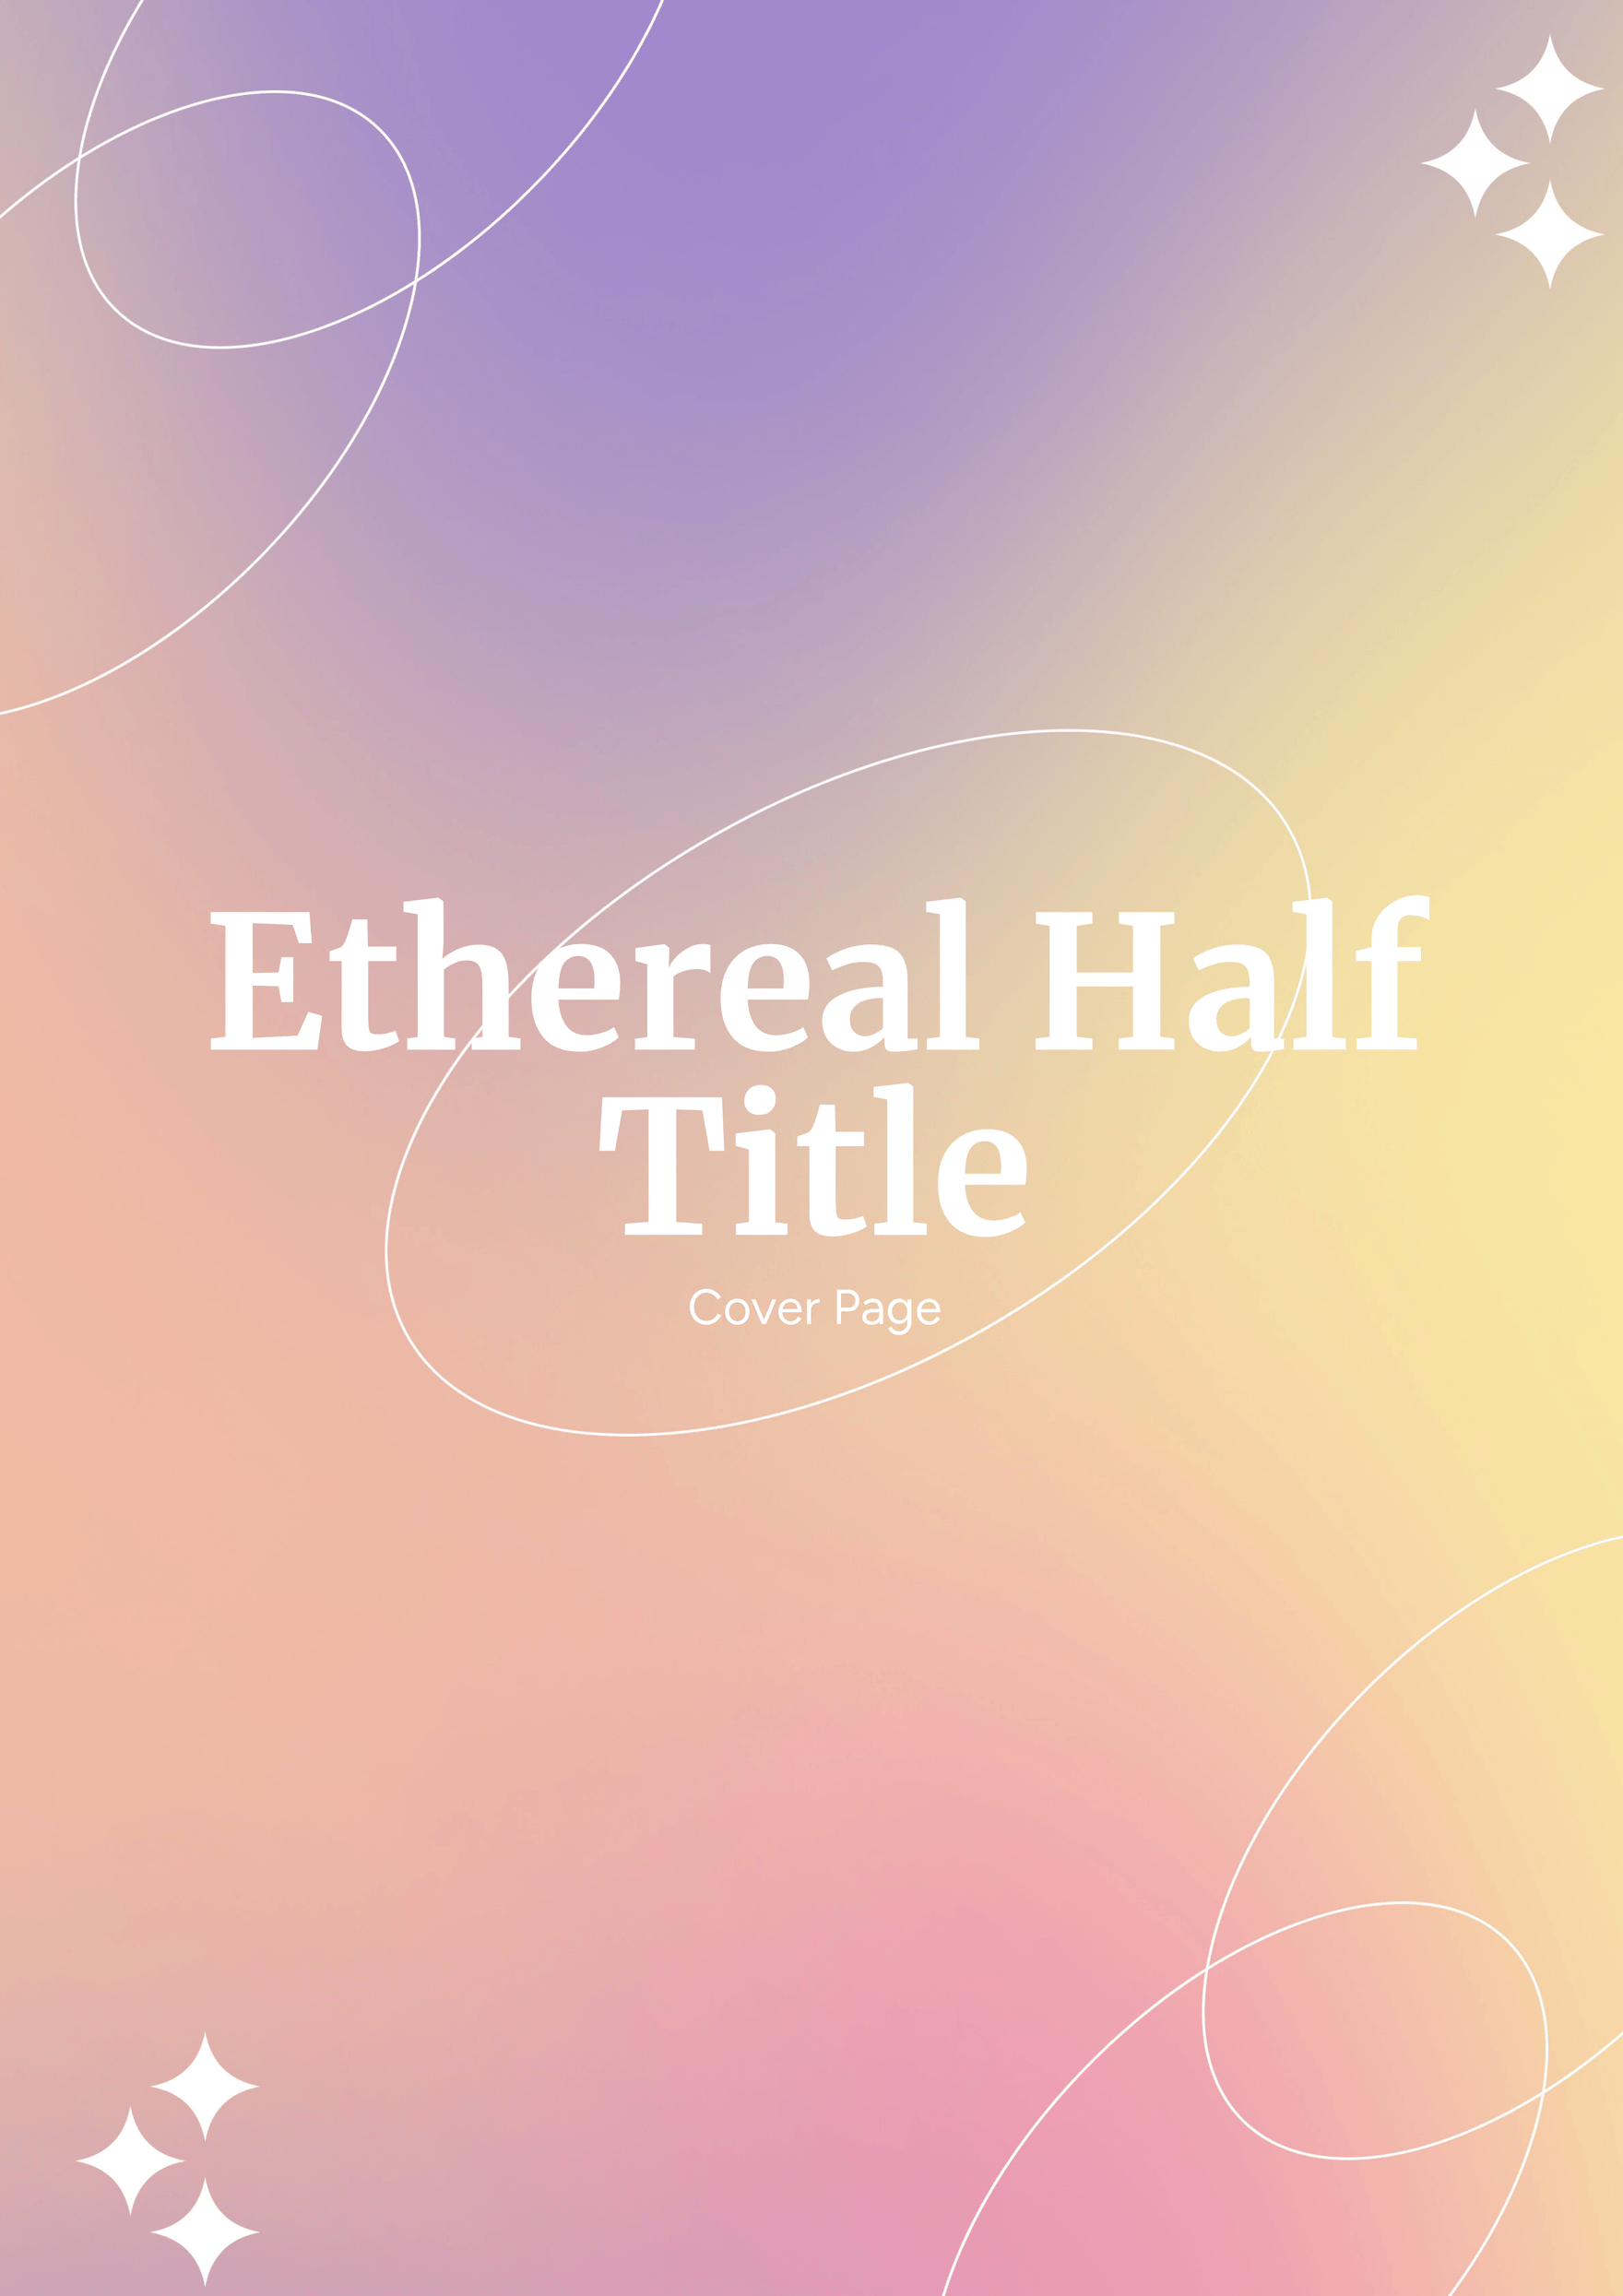 Ethereal Half Title Cover Page Template